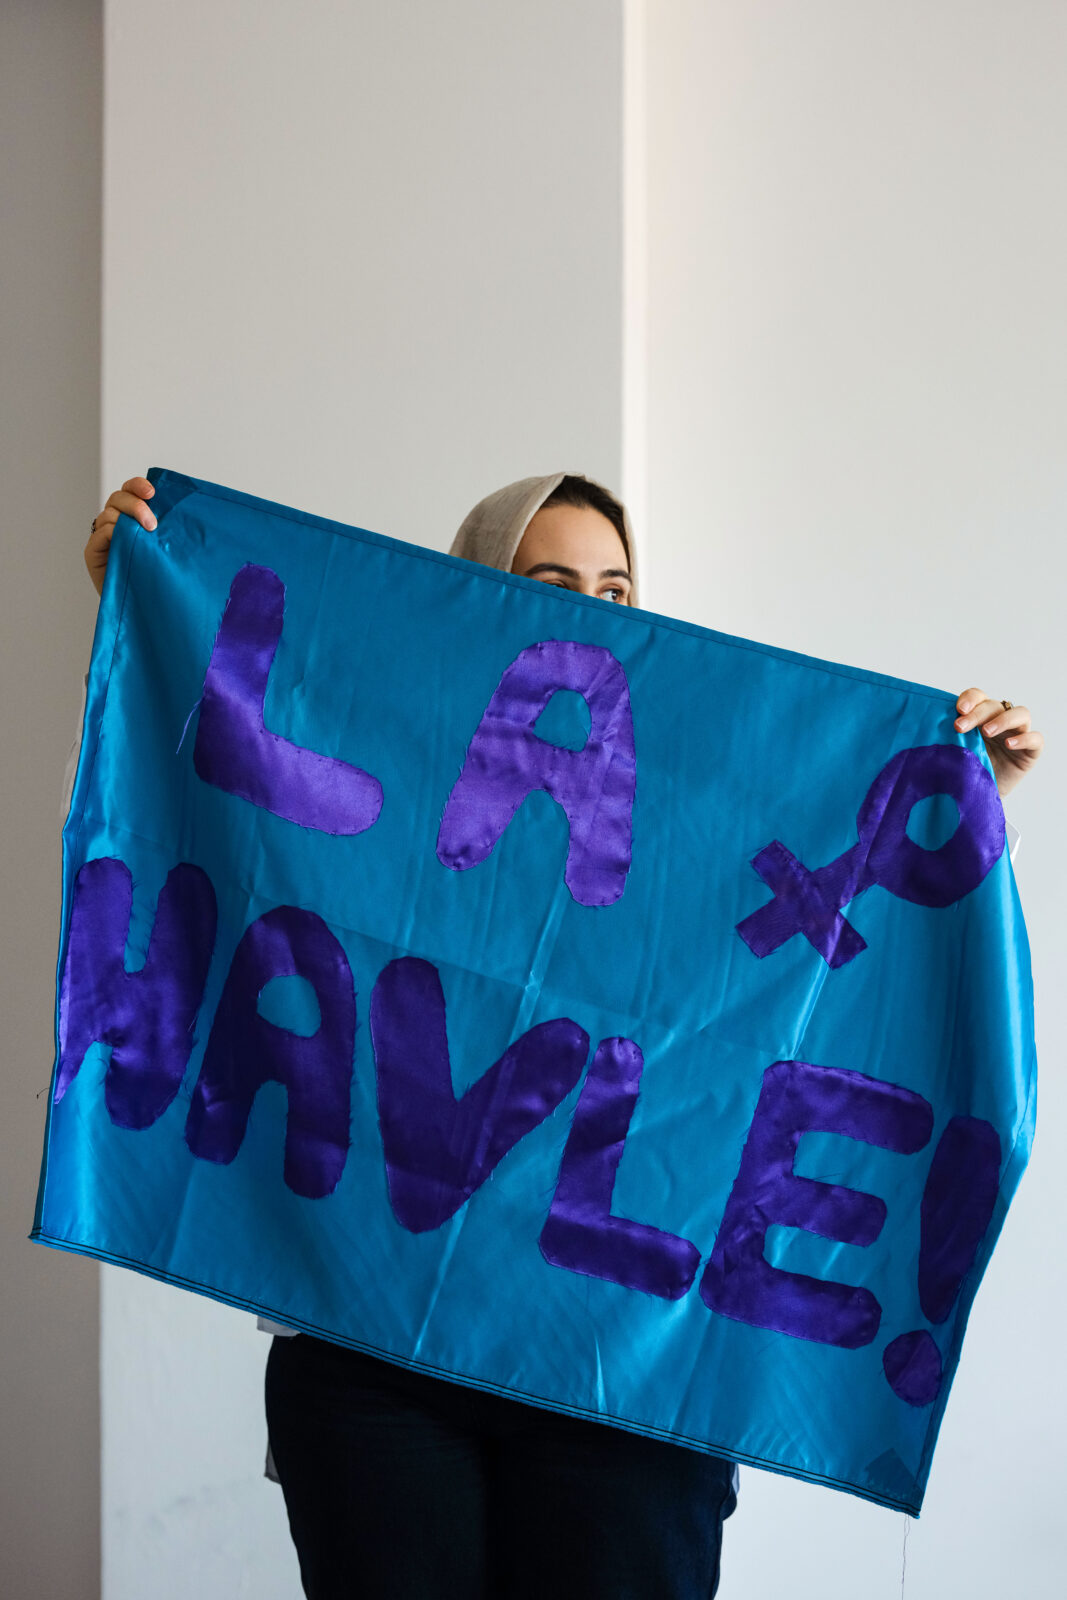 A woman stands holding a blue sign that says "La Halve" in purple letters.